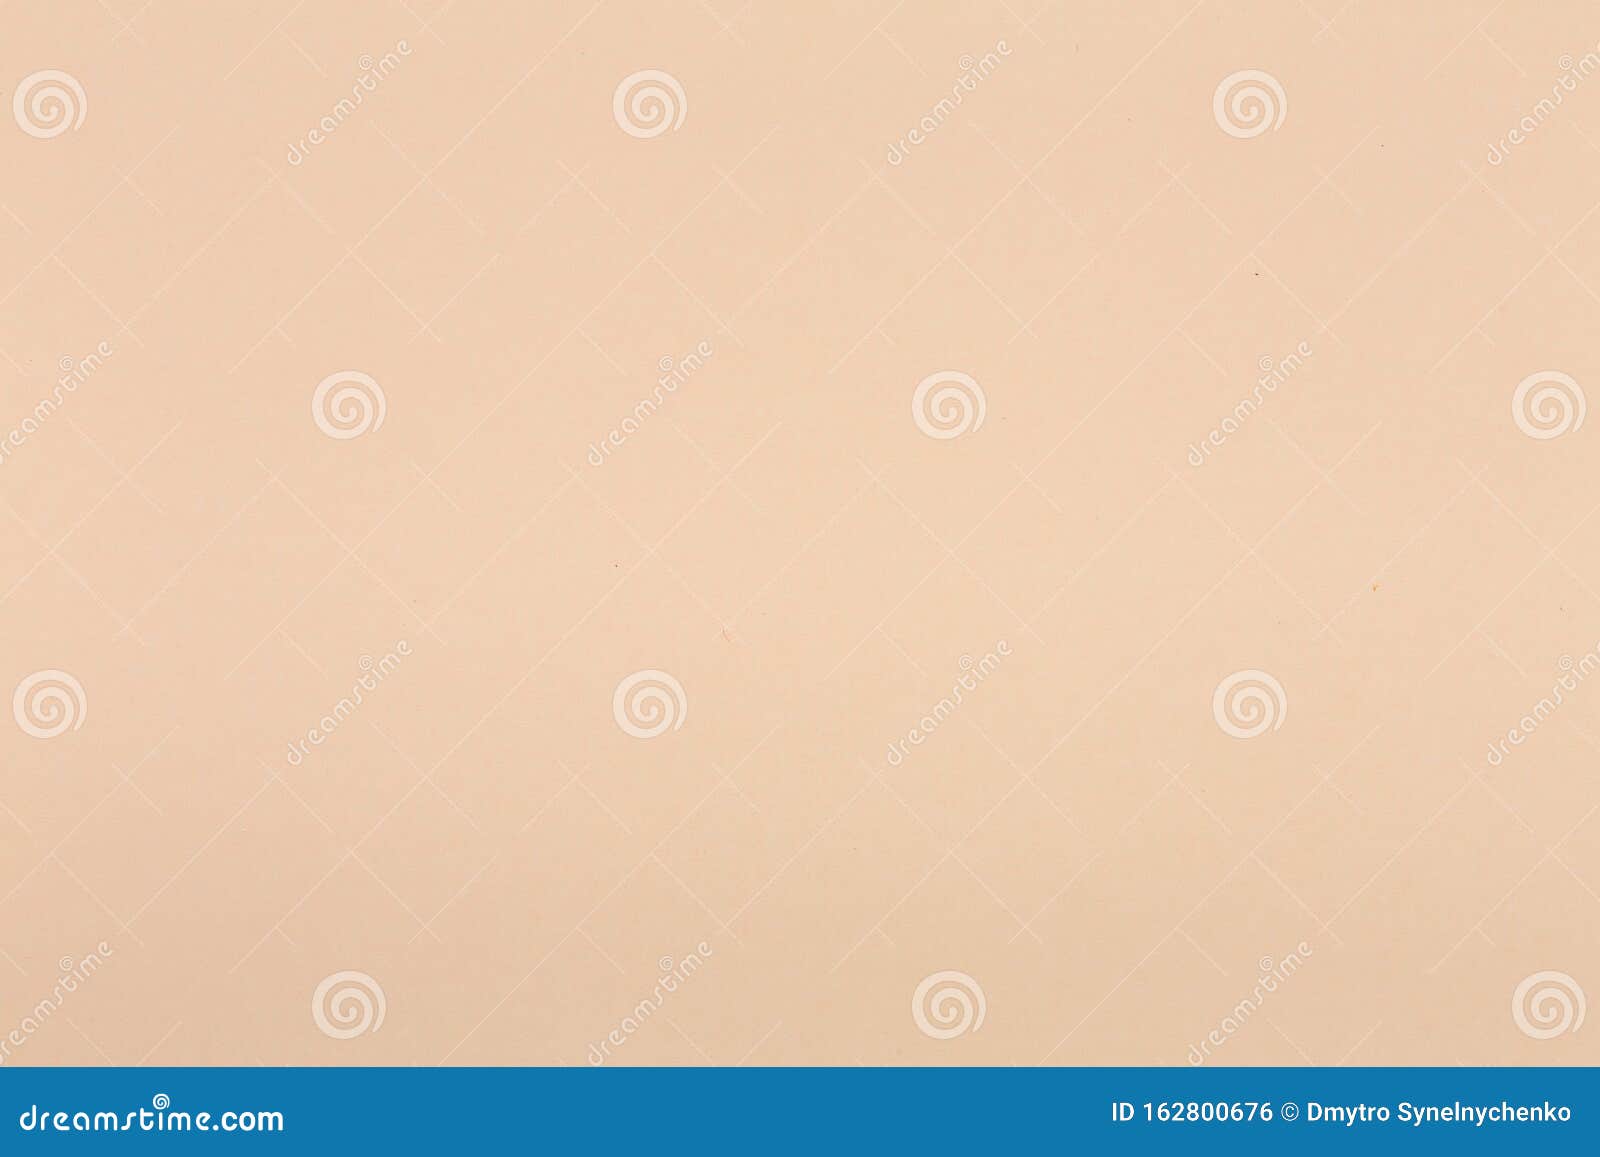 Beige Cream Color. High Quality Paper Texture. Stock Photo - Image of  blank, brown: 162800676